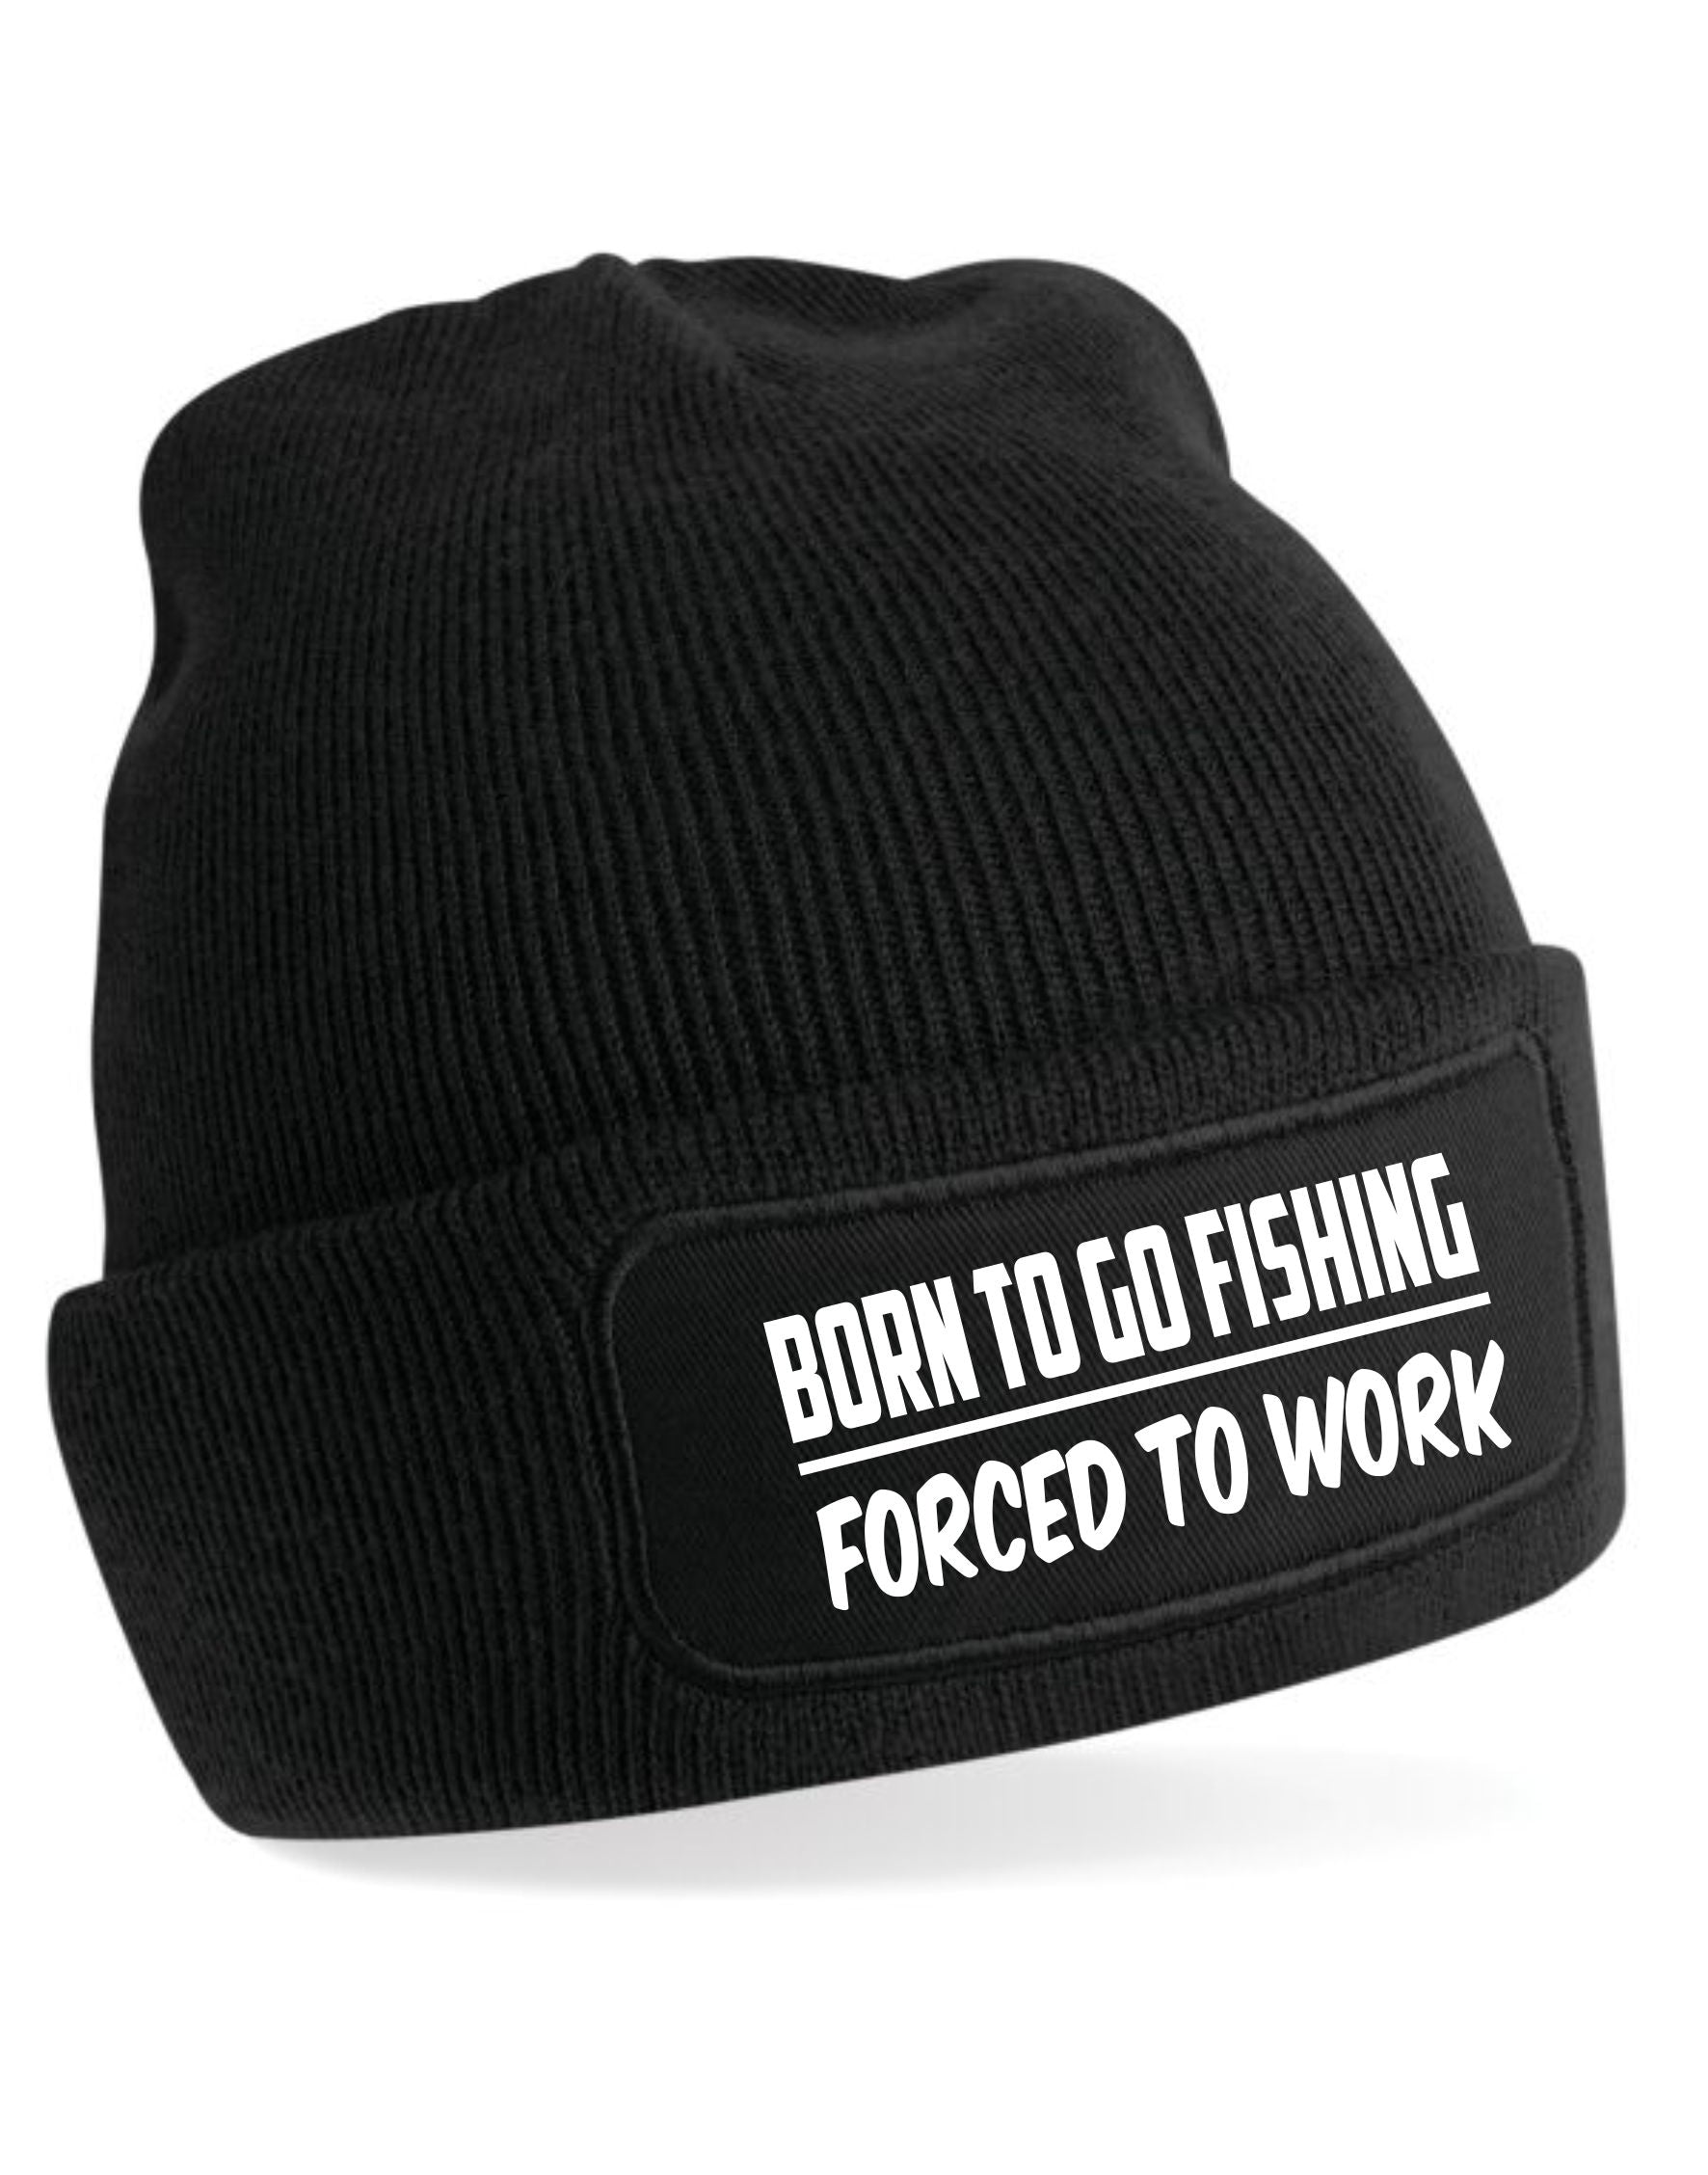 Born To Fish Forced To Work Beanie Hat Fisherman Fishing Gift For Men &  Ladies